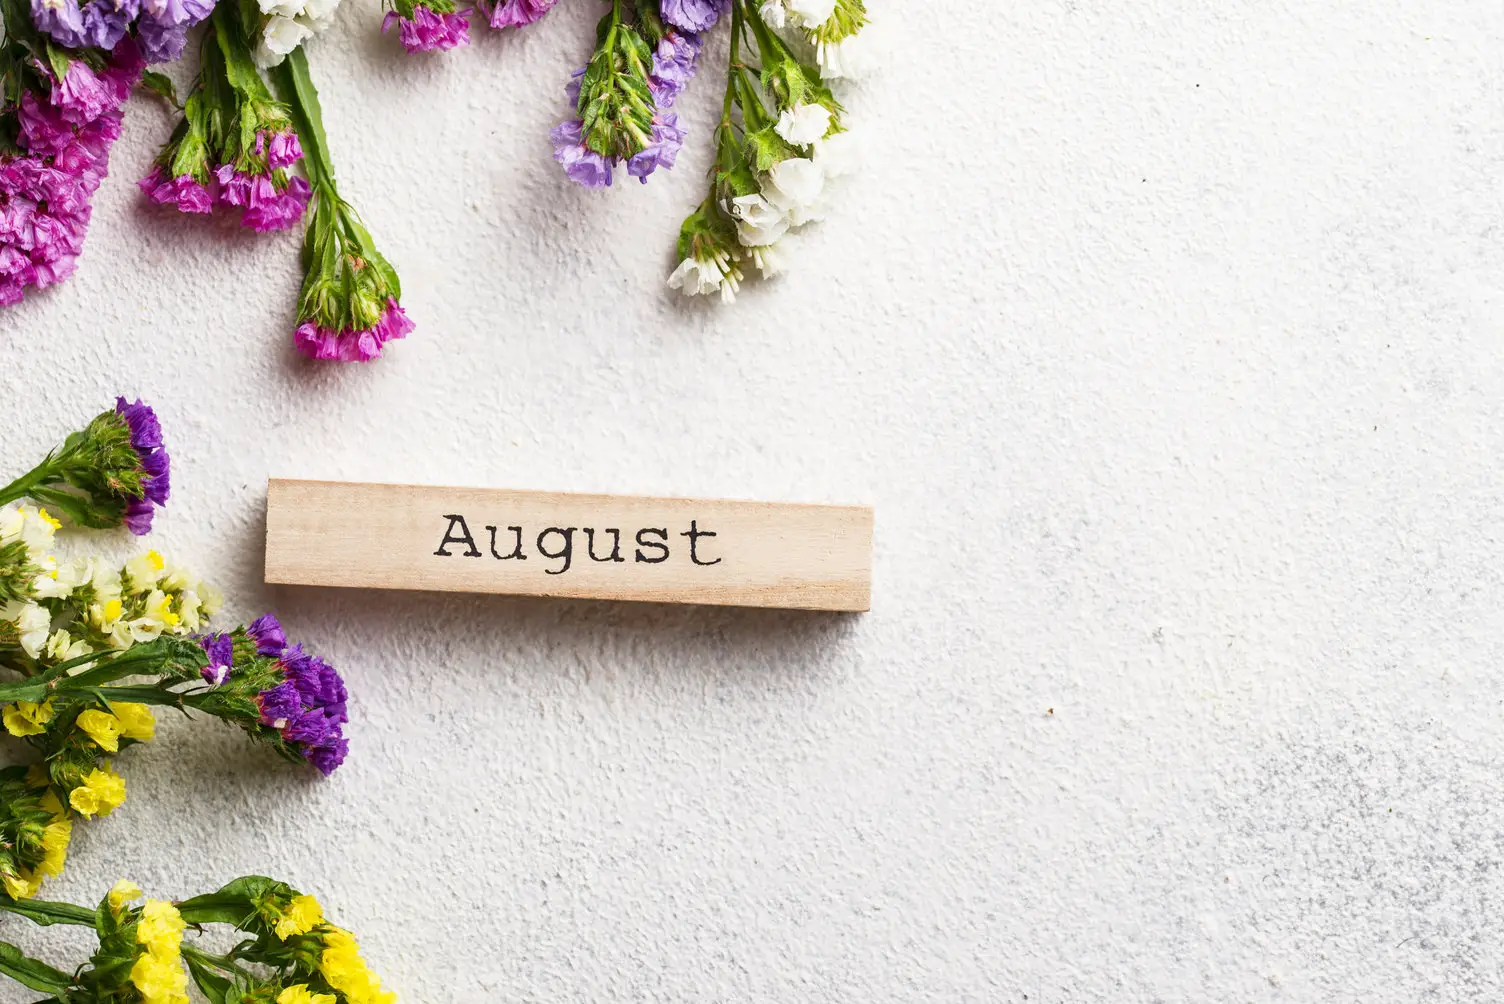 Why August Is Associated With Relaxation